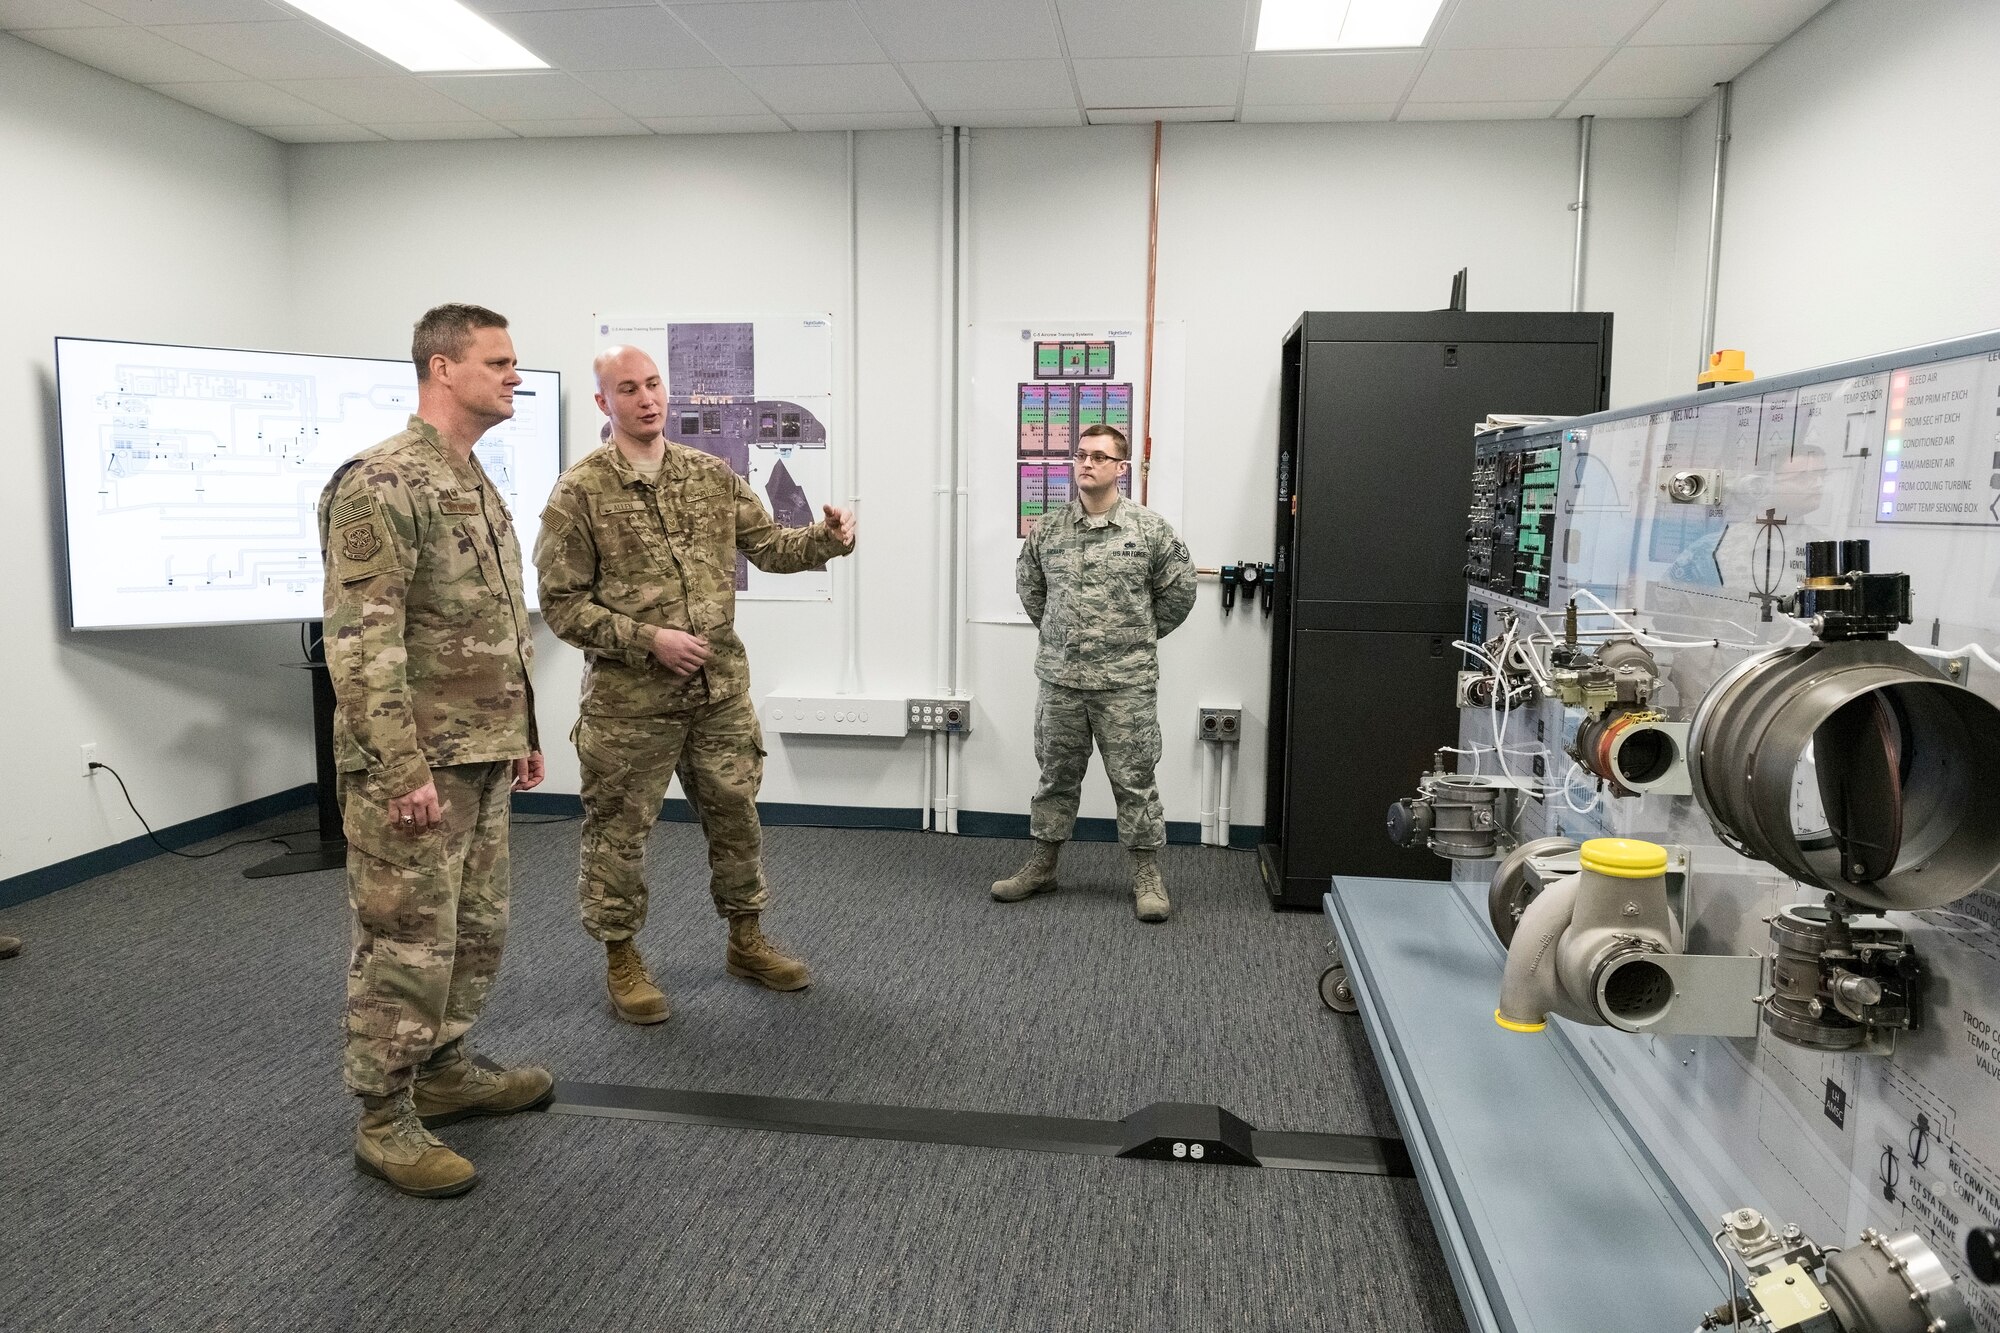 From left to right, Col. Joel Safranek, 436th Airlift Wing commander, listens to Staff Sgt. Damien Allen, 373rd Training Squadron, Detachment 3, C-5M trainer development and subject matter expert, explain the history and process of updating both of the legacy C-5 Air Conditioning and Pressurization Systems Trainers Feb. 20, 2019, at the 373rd Training Squadron, Detachment 3, on Dover Air Force Base, Del. The upgraded AC & PSTs are valued at $5.9 million dollars each and took 12 months to convert to the C-5M Super Galaxy configuration. (U.S. Air Force photo by Roland Balik)